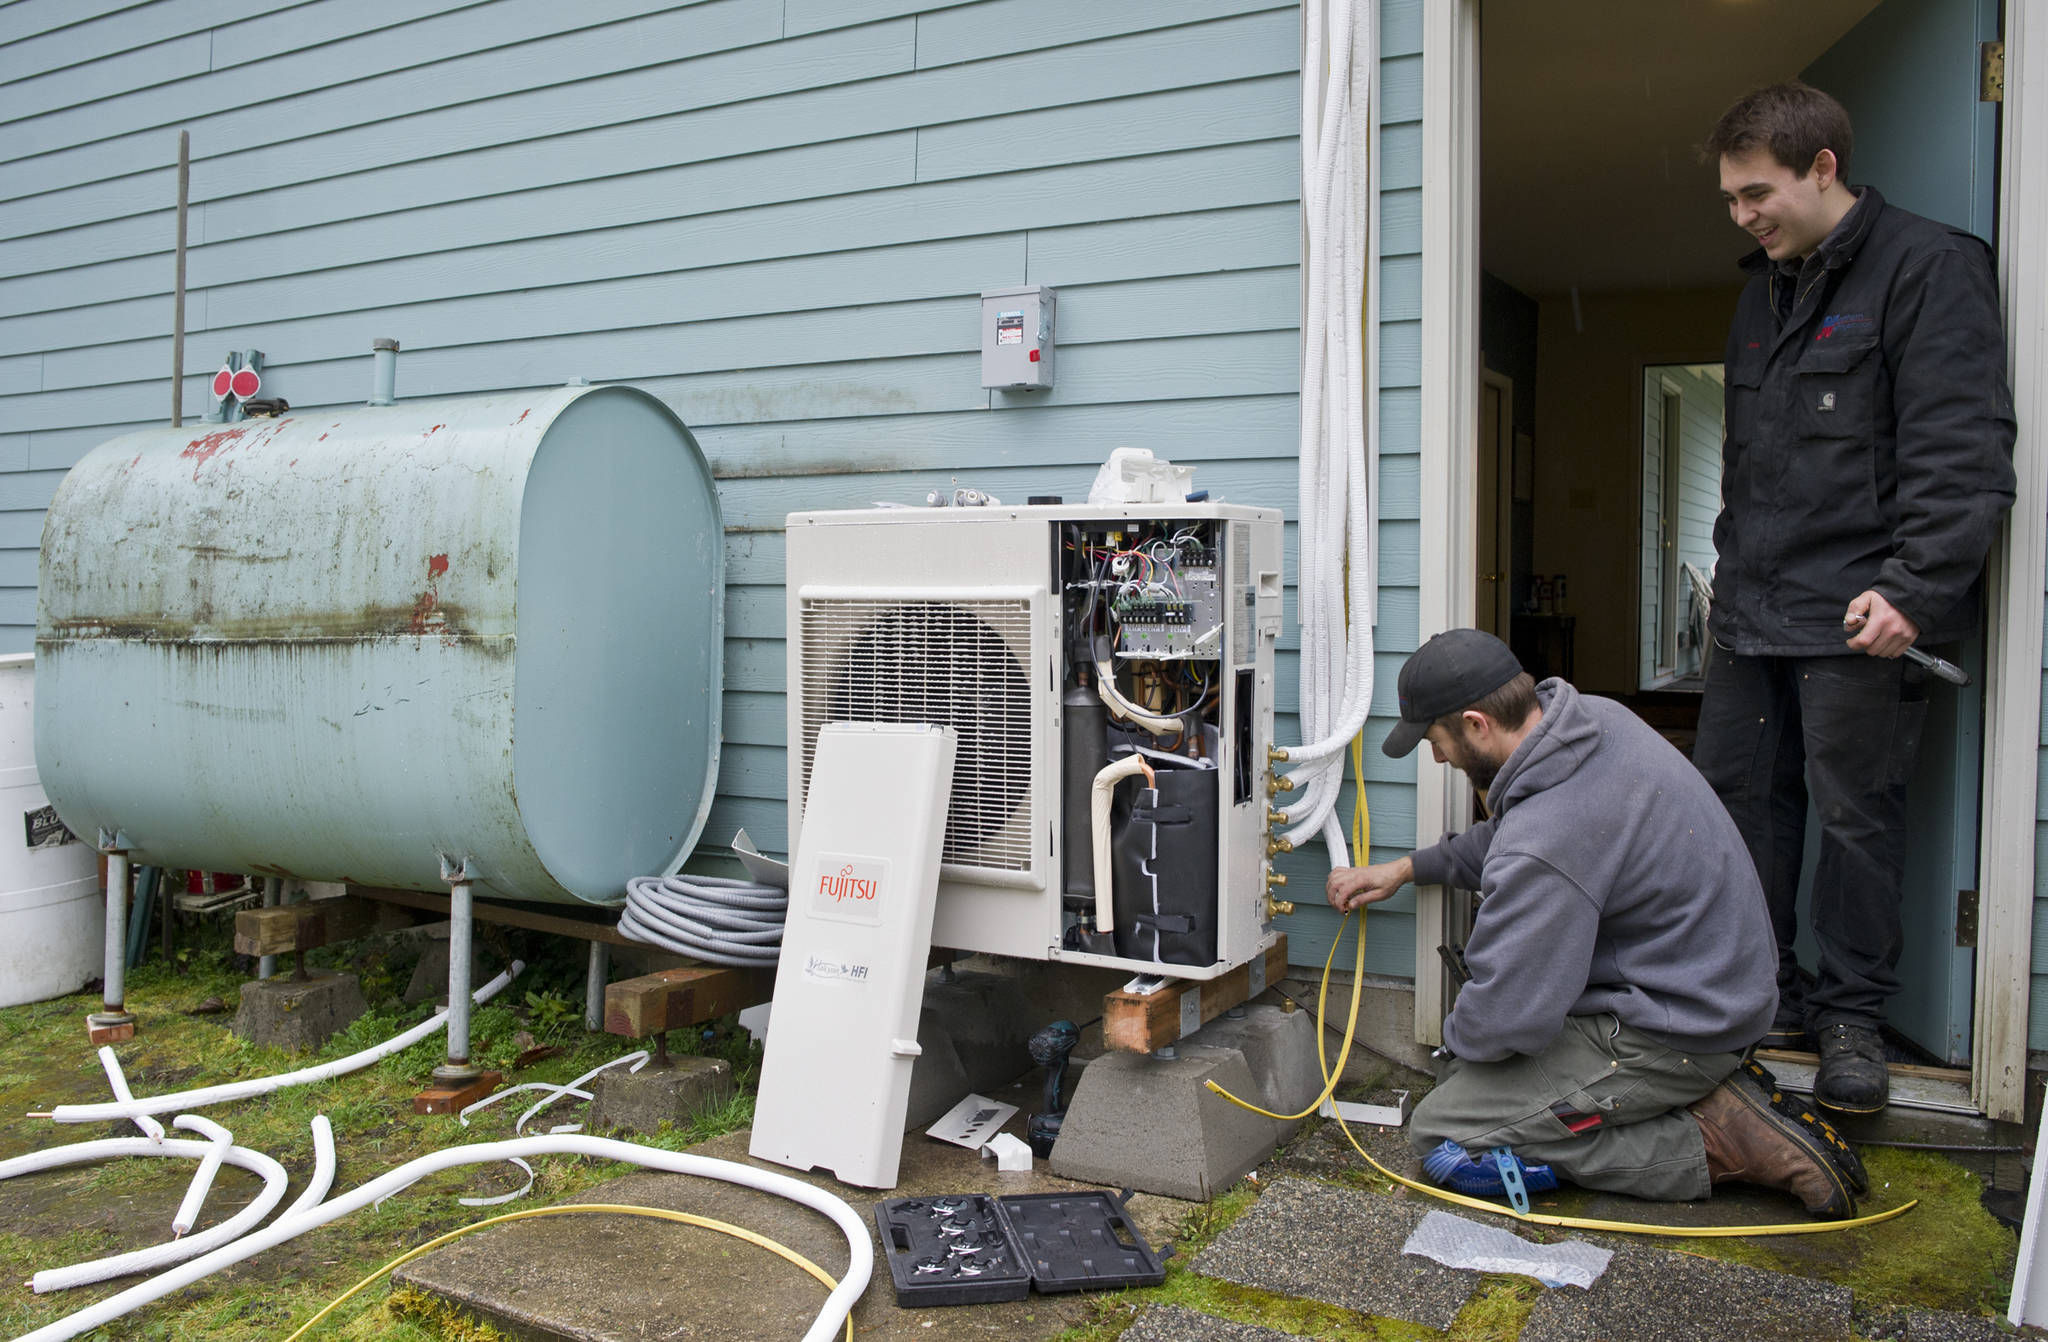 Michael Penn / Juneau Empire file
Air-source heat pumps, like the one in this 2015 photo of Jake Eames, right, and David Nash installing a pump, are an example of a load-side technology that can increase energy efficiency. “Load-side technologies are absolutely key to our ability to reduce greenhouse emissions in the energy sector,” said director of energy services at Alaska Electric Light and Power Alec Mesdag.